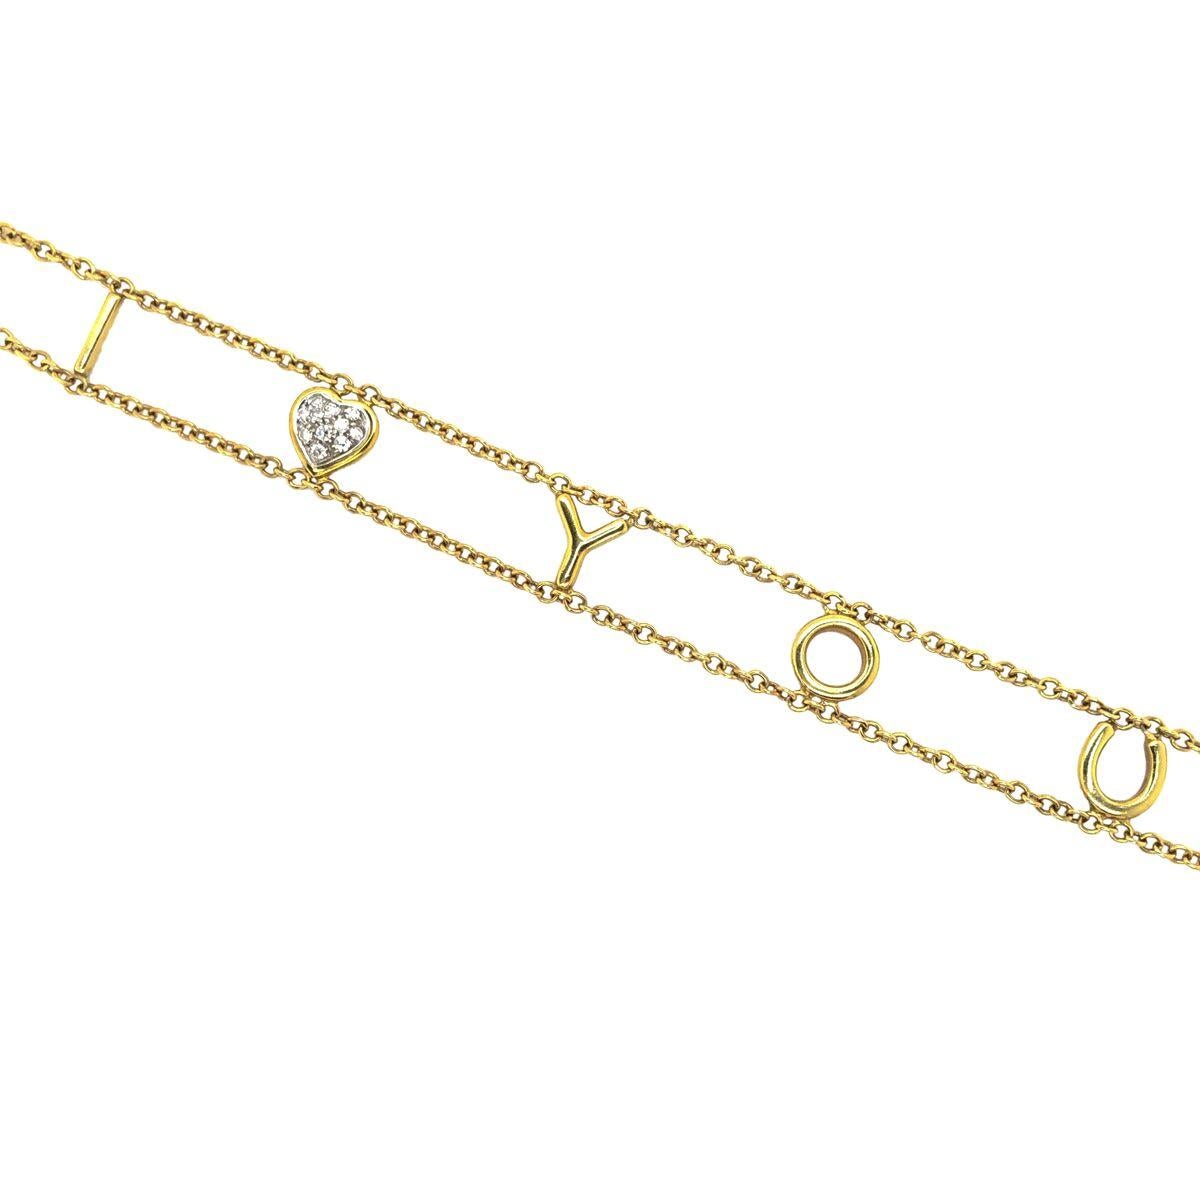 Round Cut 18 Karat Yellow Gold I Love You Chain Link Bracelet For Sale